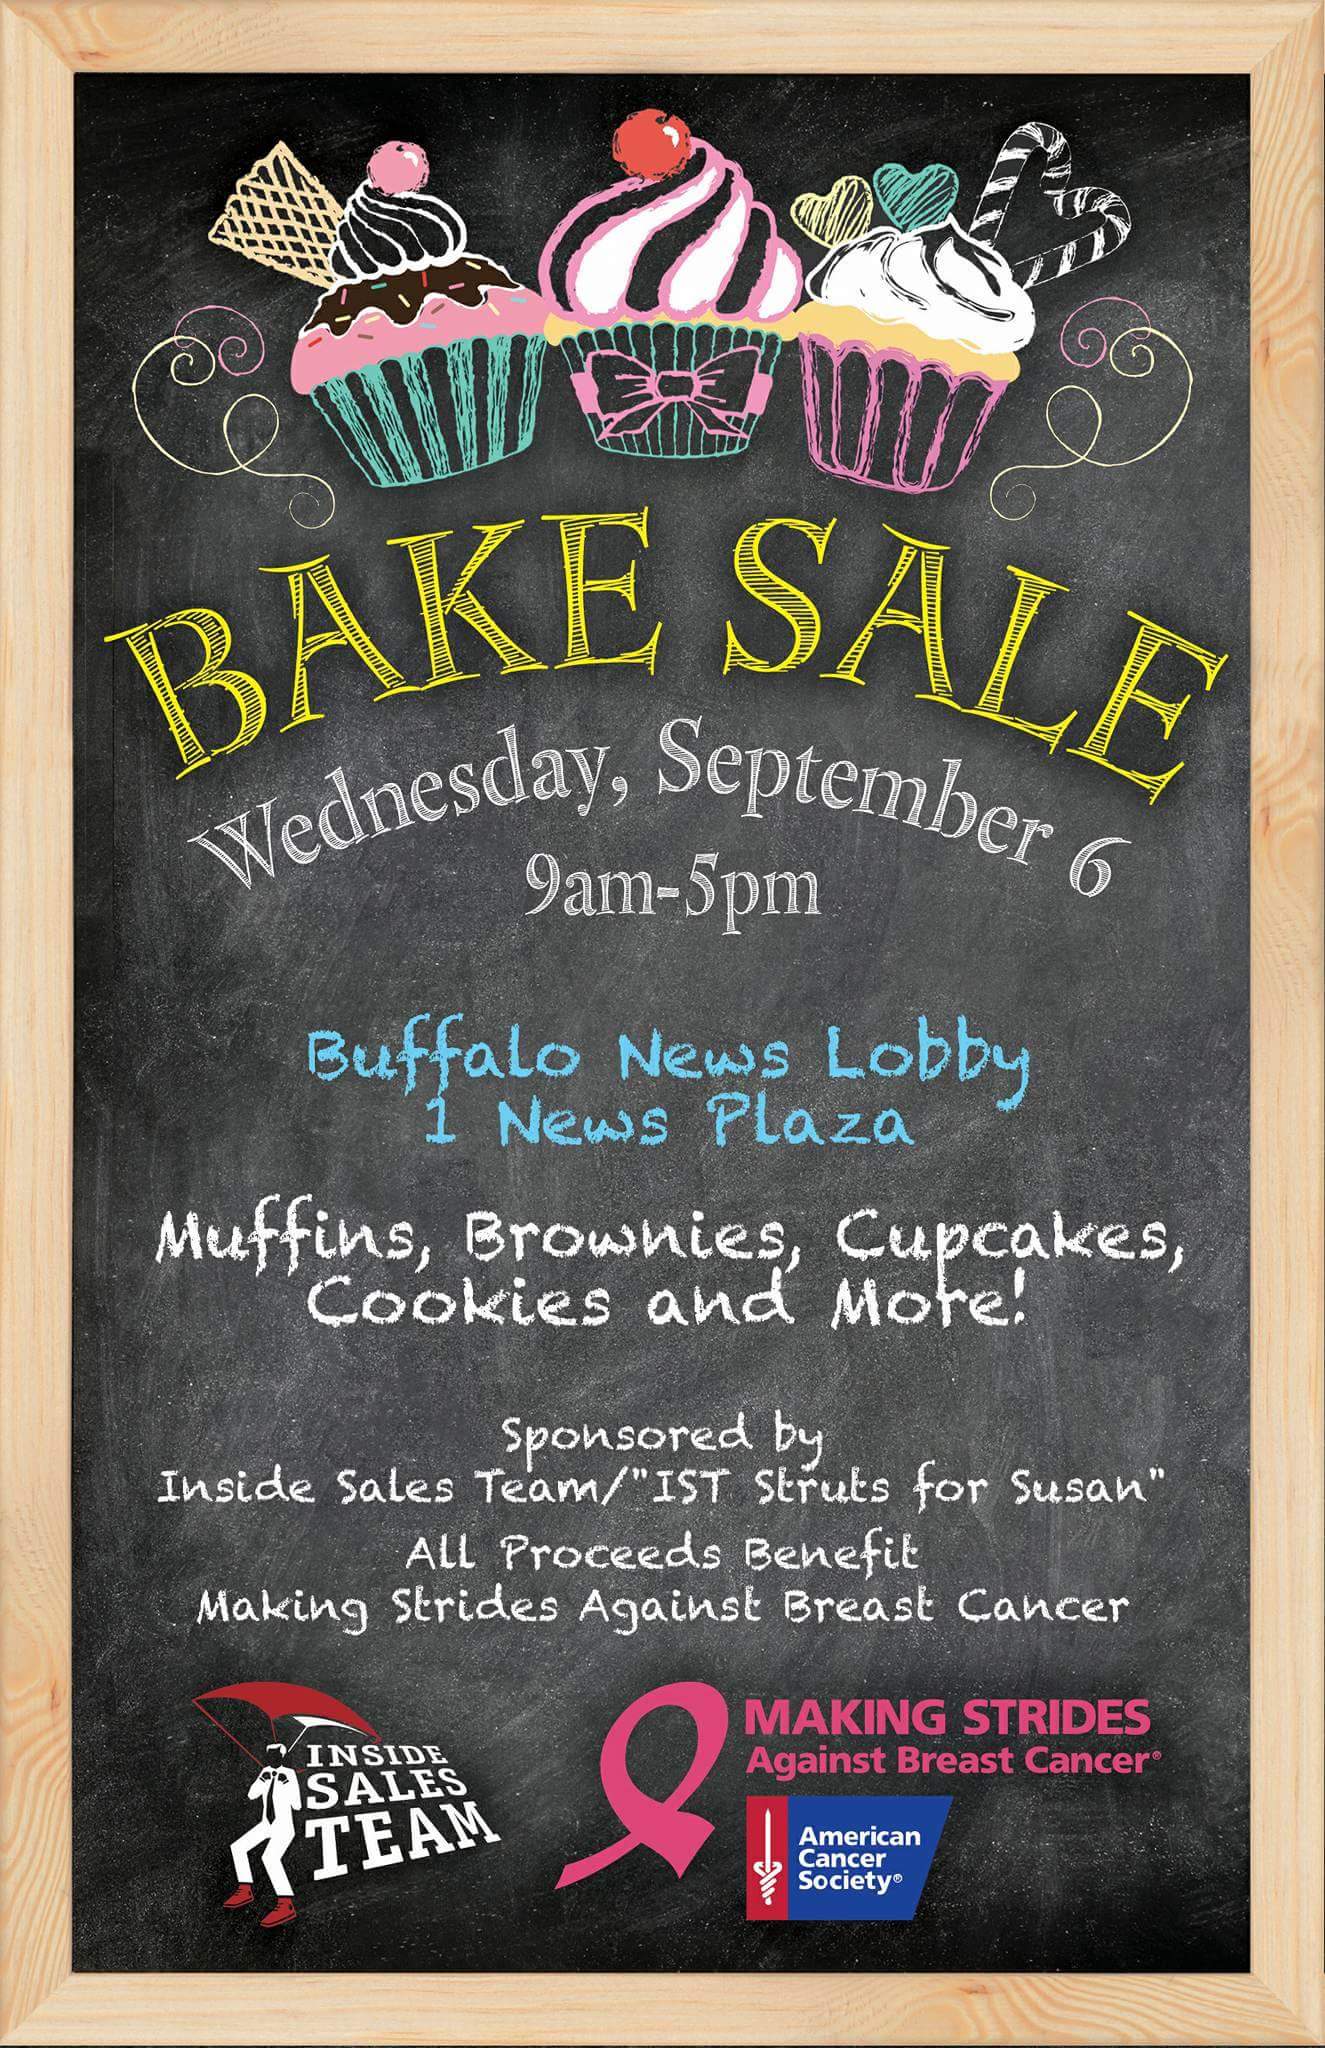 If you’re downtown today – don’t miss out on this bake sale for a GREAT cause!